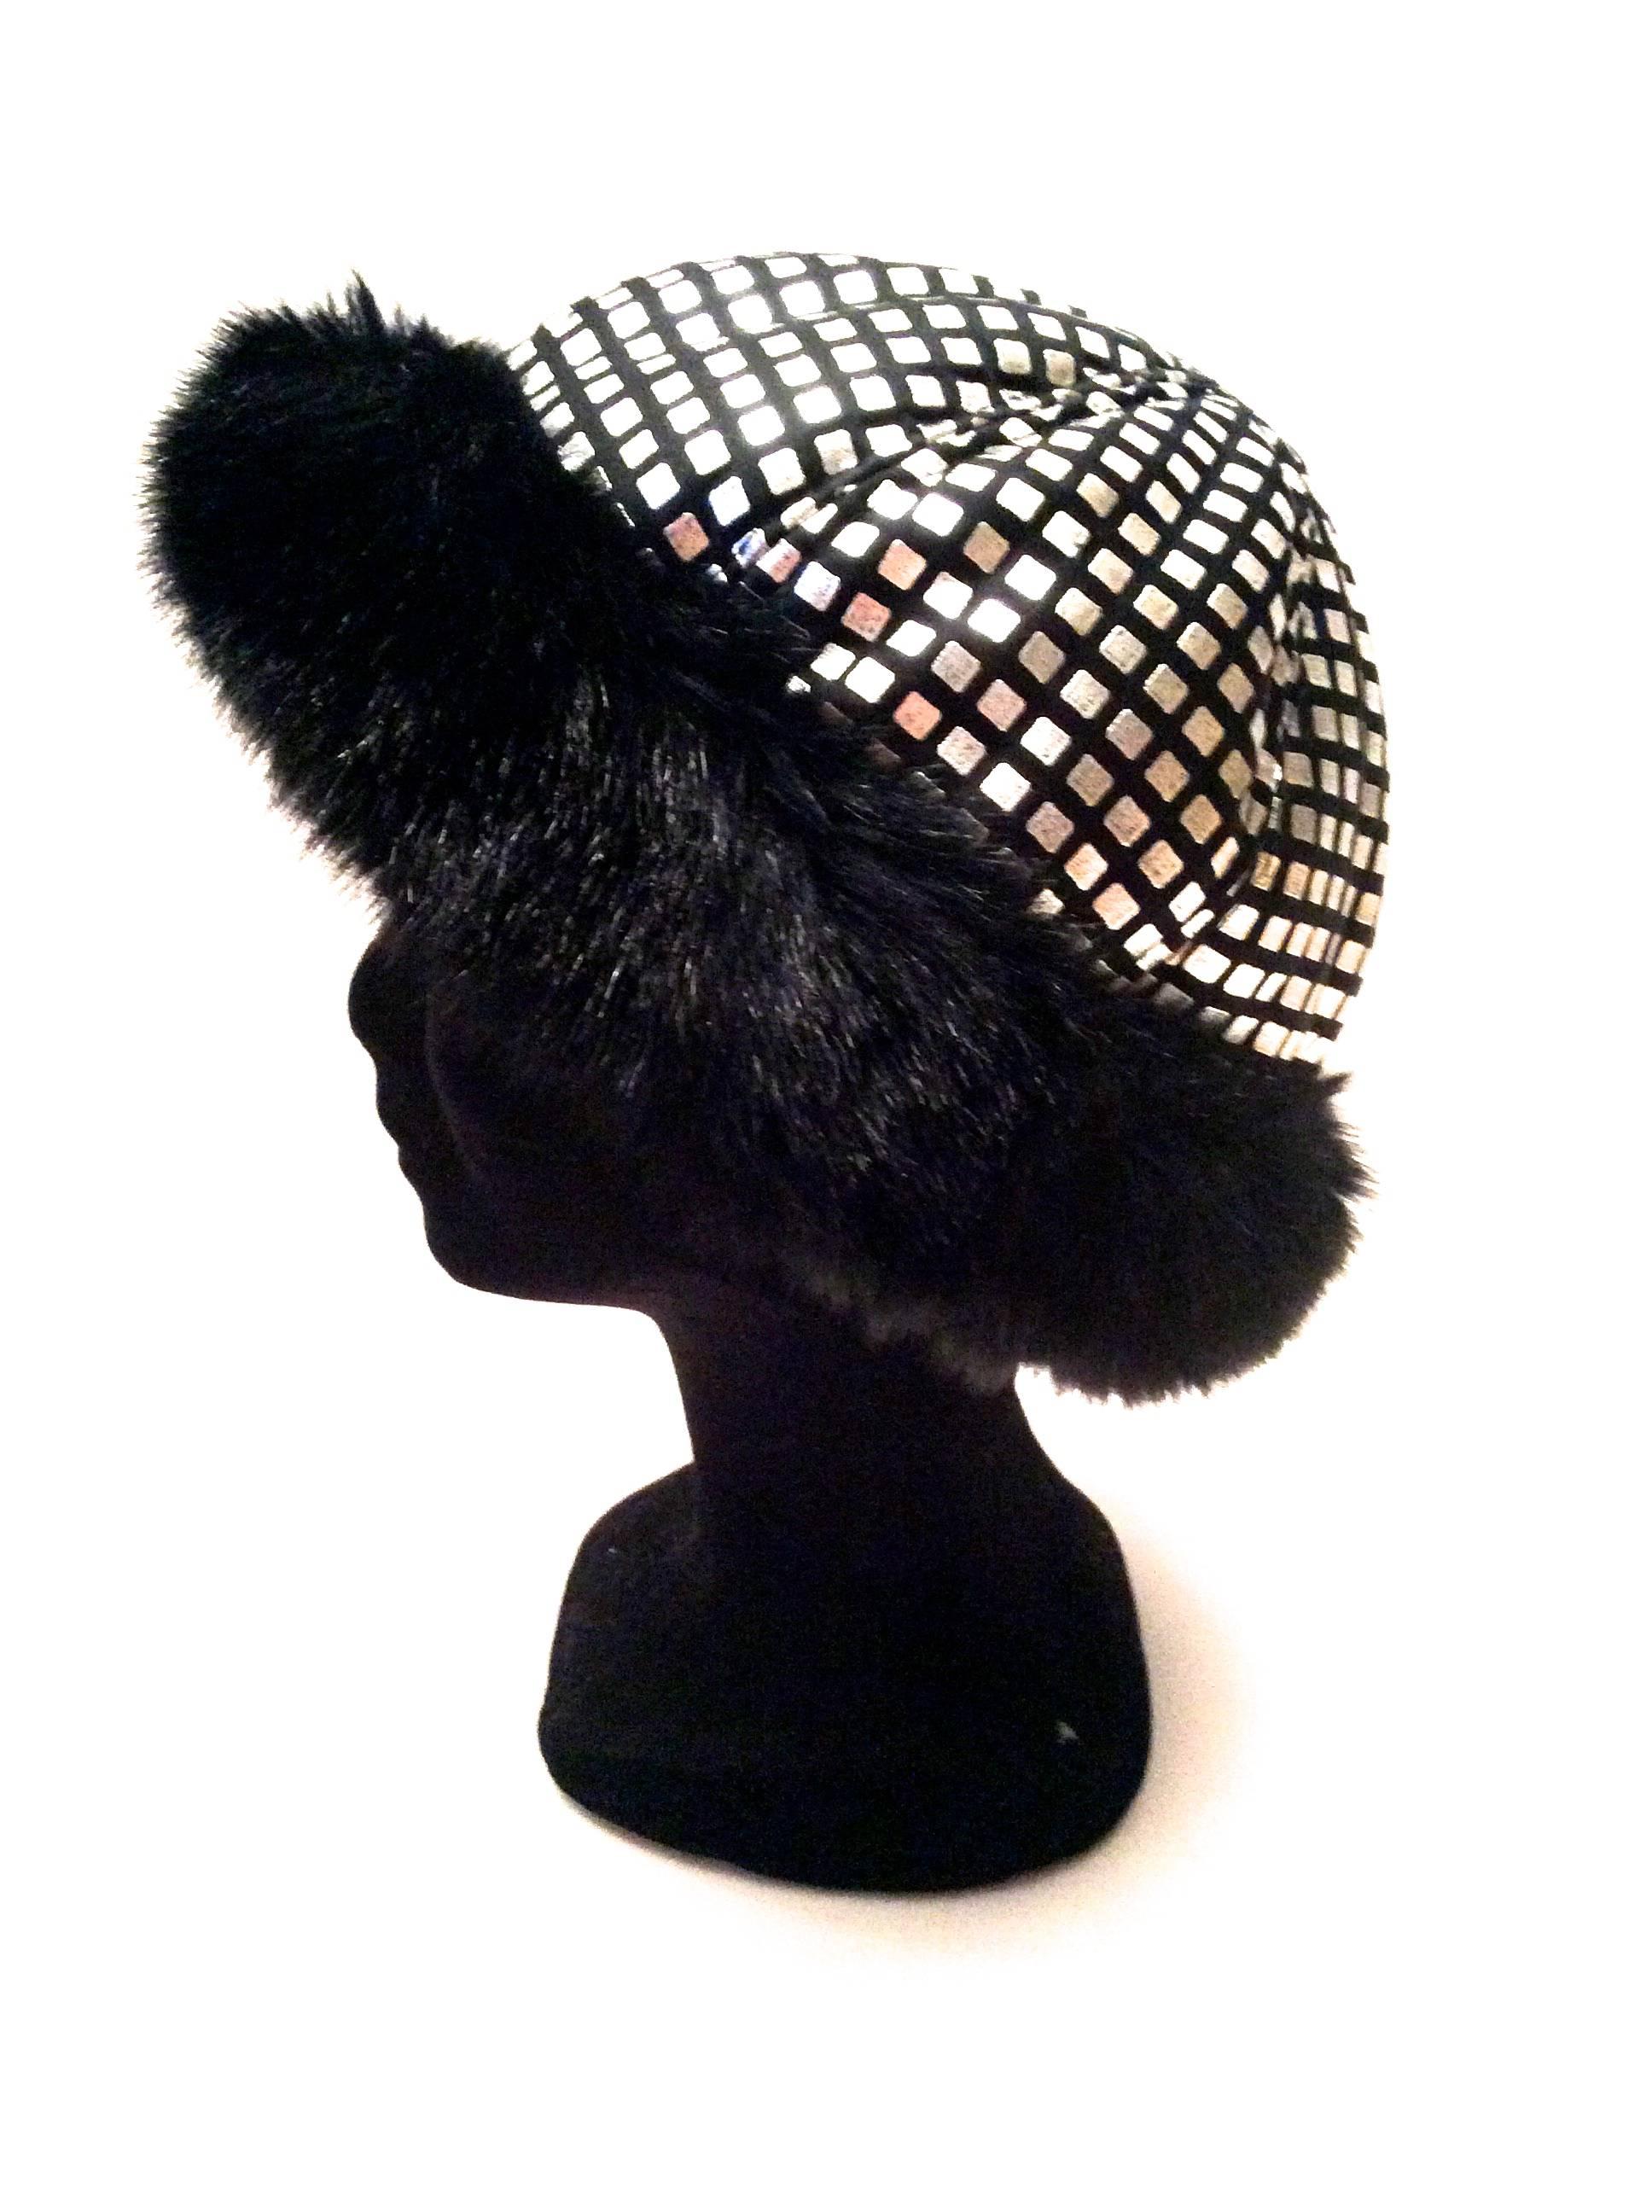 1960's Mod Silver and Black Geometric Hat In Excellent Condition For Sale In Boca Raton, FL